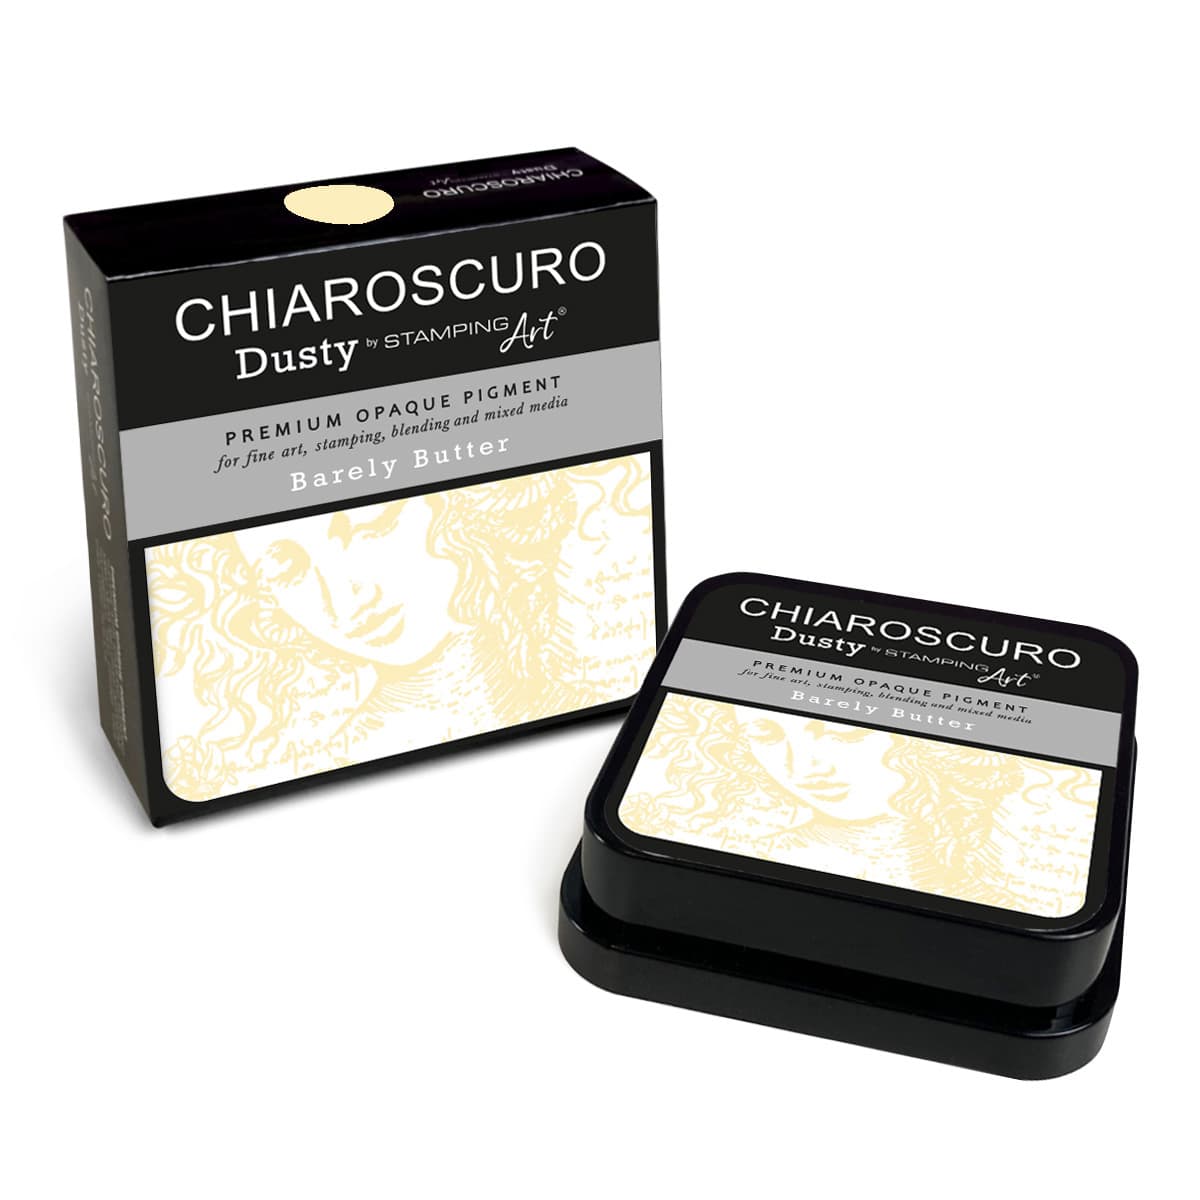 Barely Butter Chiaroscuro Dusty Ink Pad